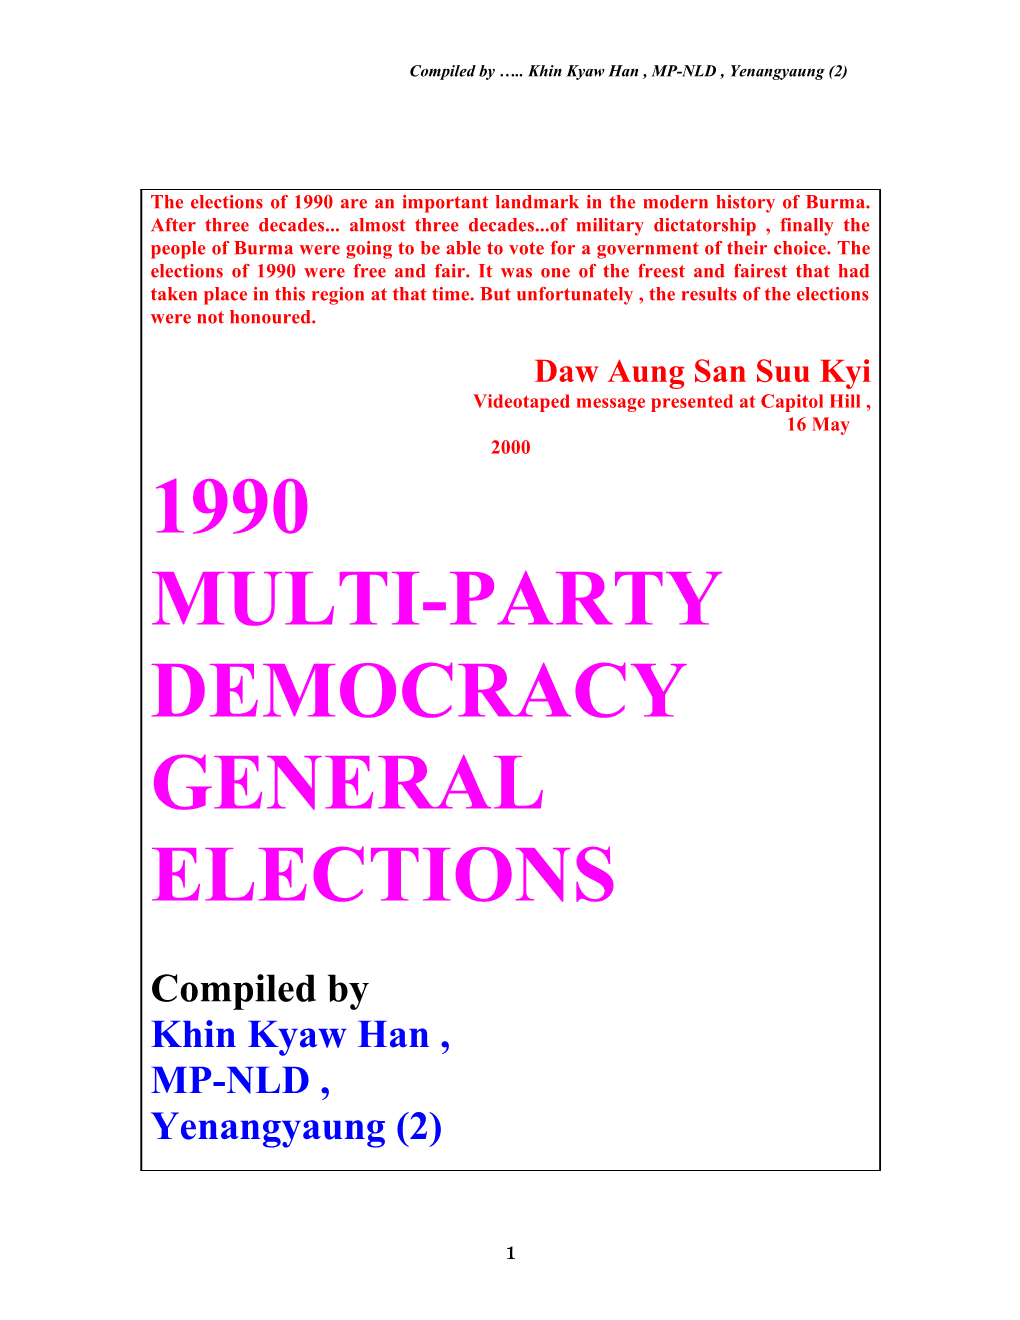 1990 Multi-Party Democracy General Elections